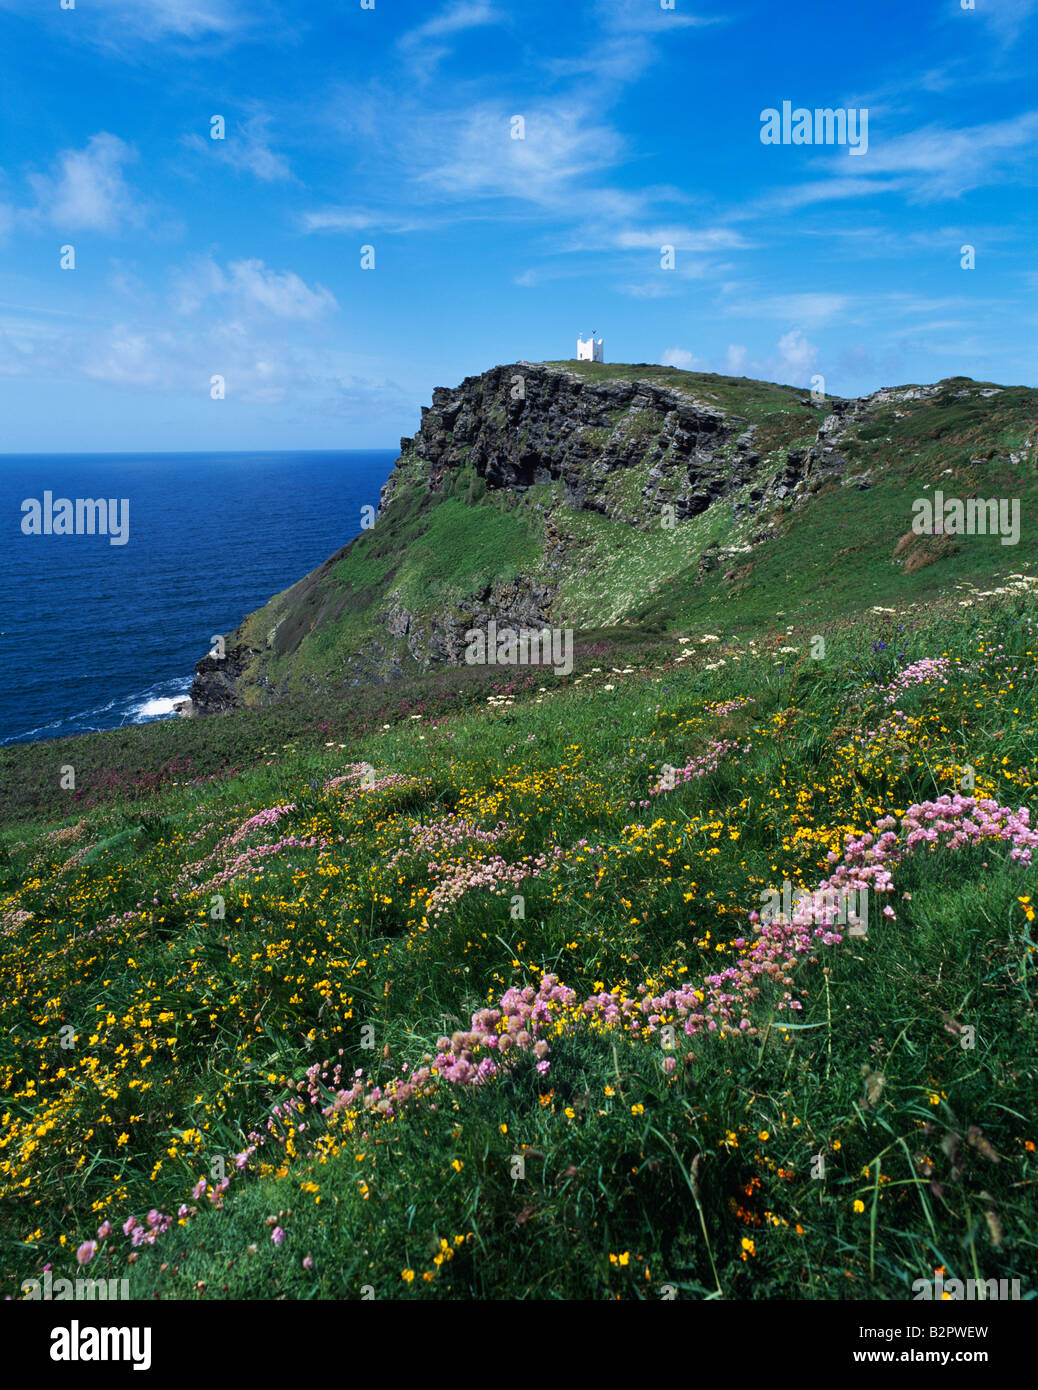 Willapark Lookout overlooking the Atlantic Ocean and Boscastle Harbour on the North Cornwall coast by Forrabury Common, Boscastle, Cornwall, England Stock Photo